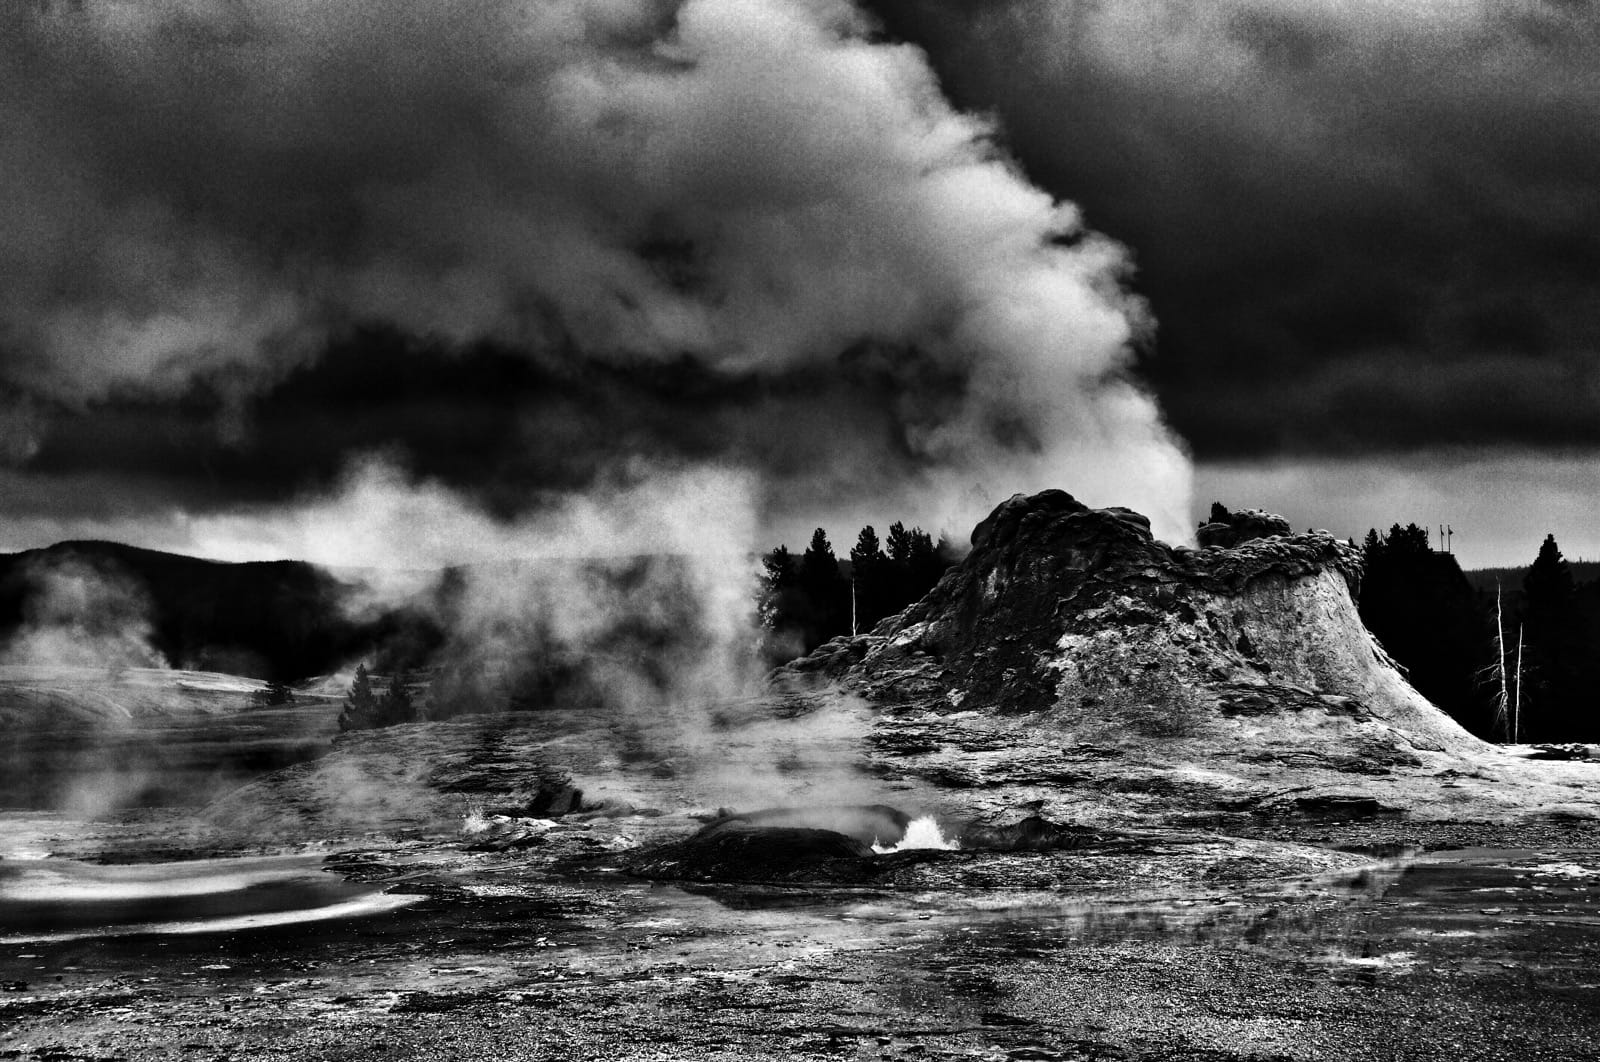 High contrast photo of steam rising from geyser vents.